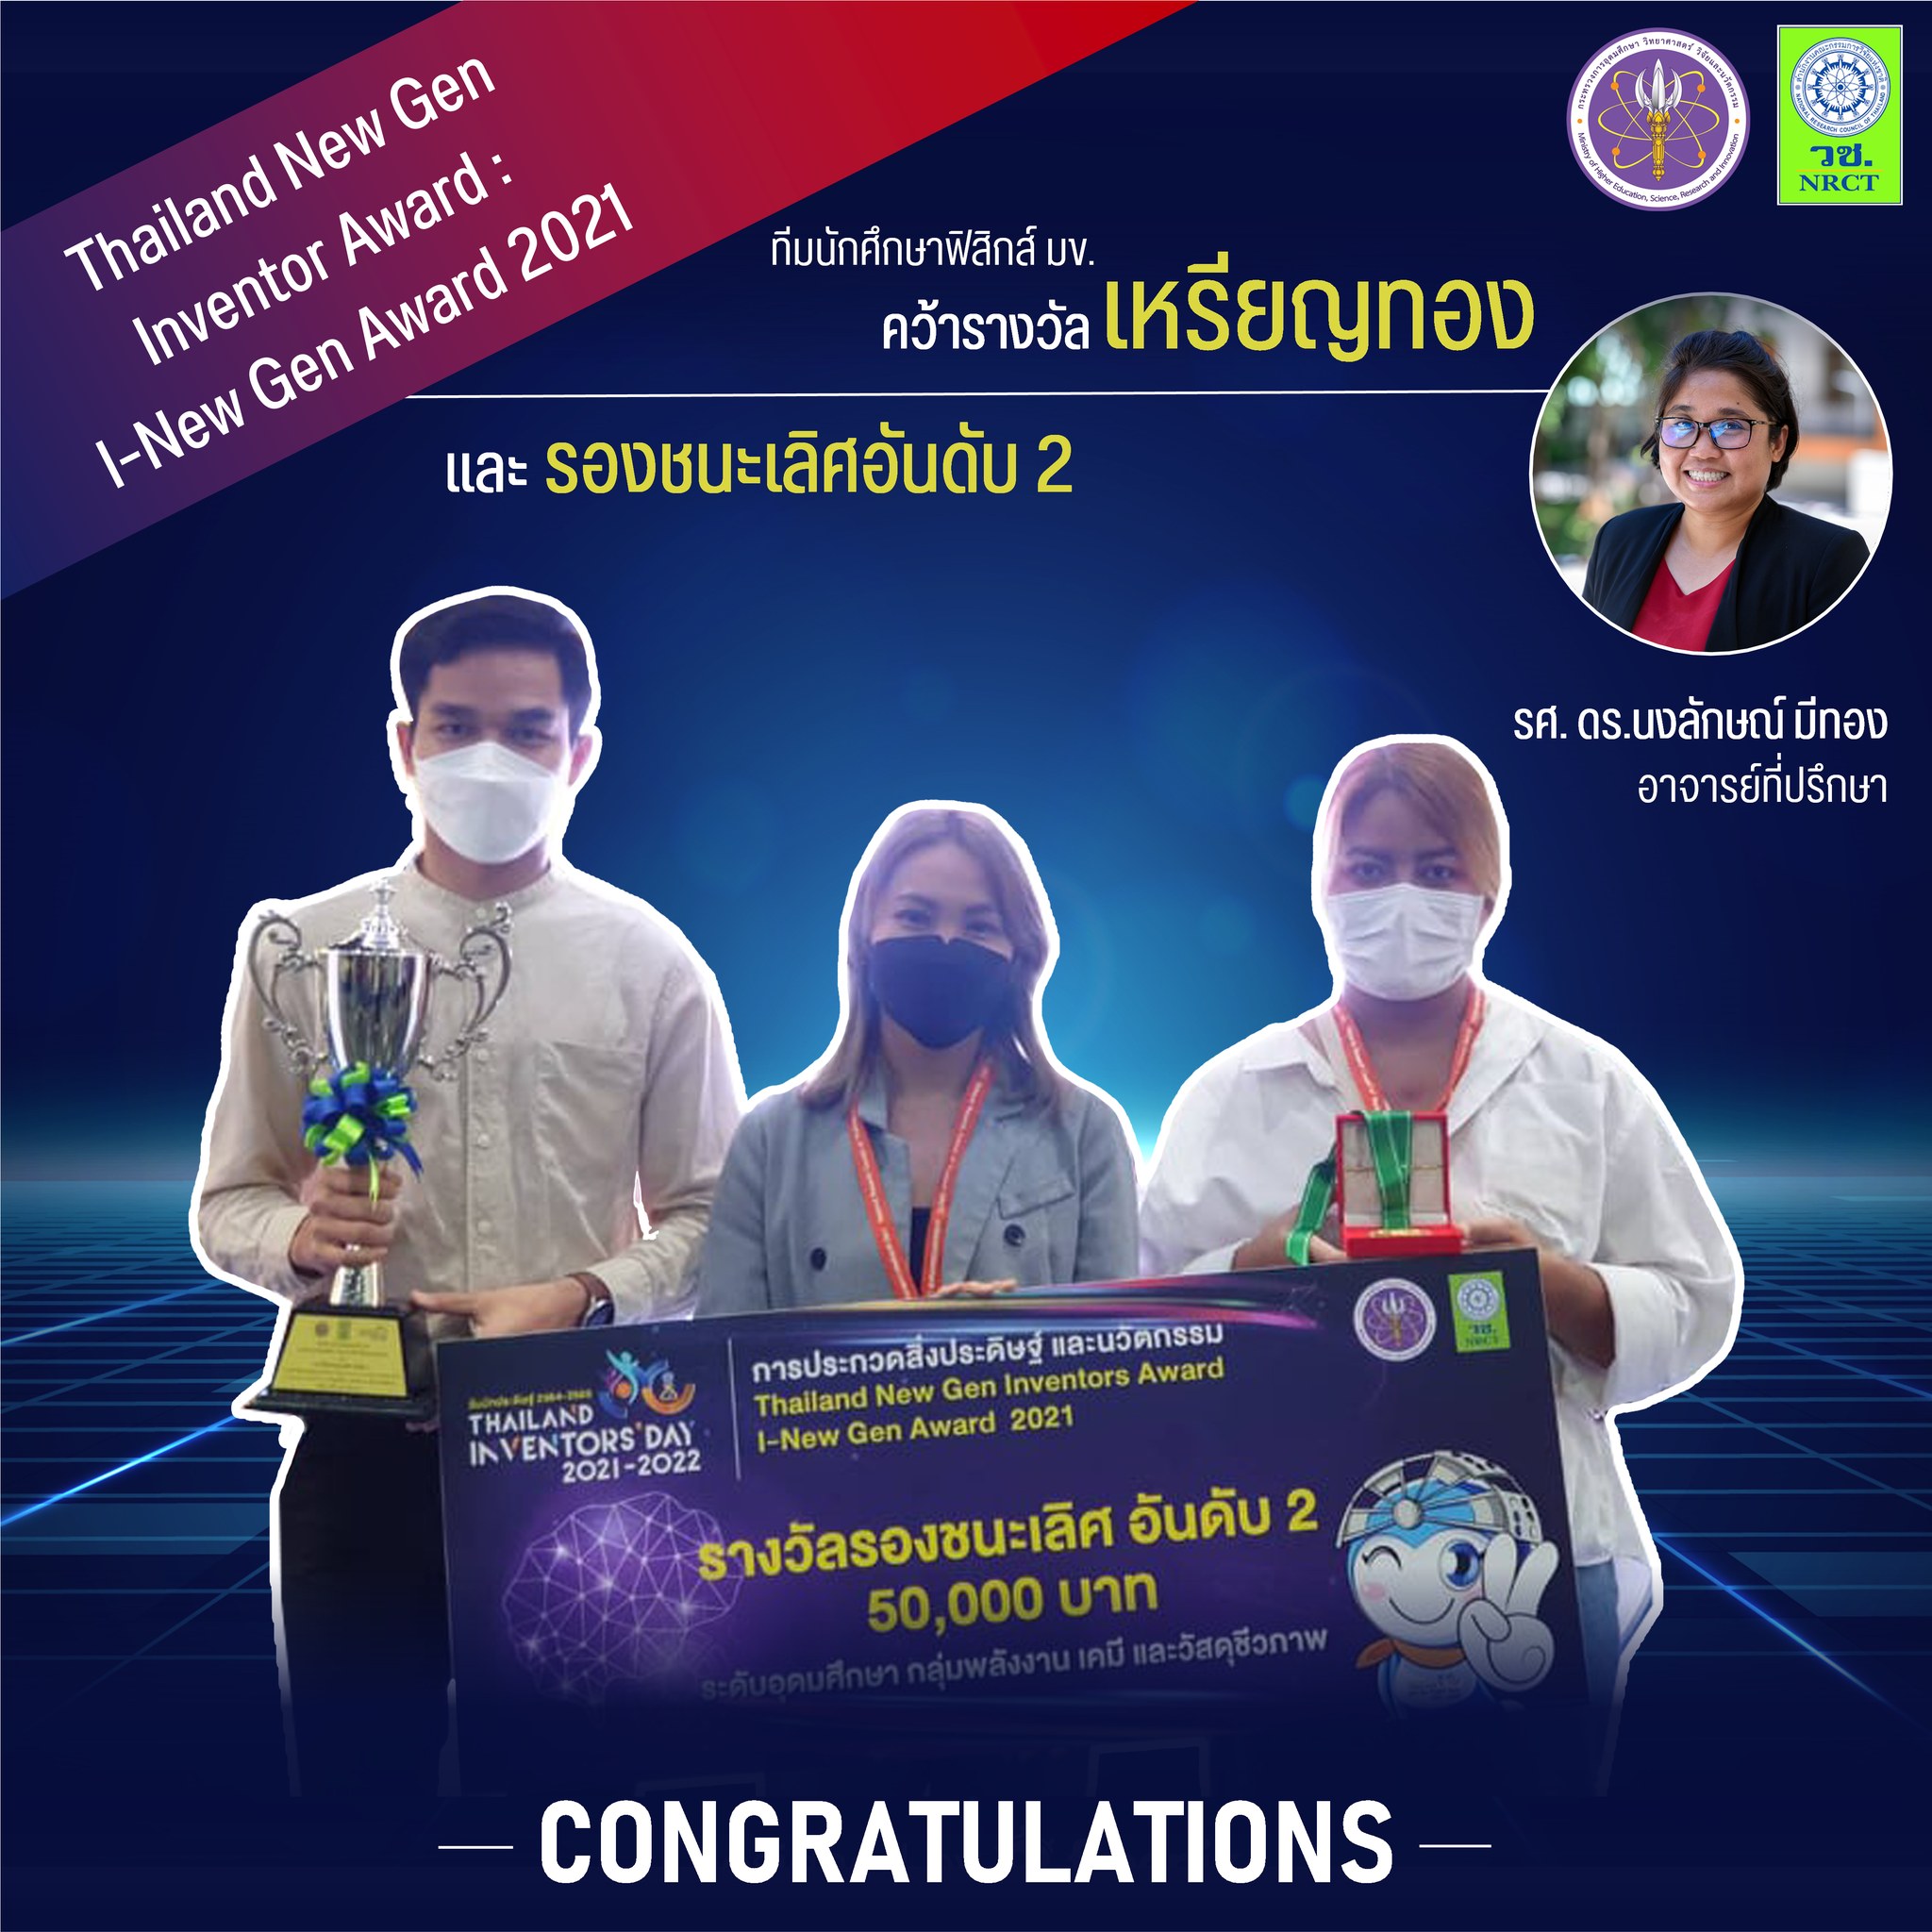 Physics Students, KKU Won 1 Gold Medal and 2 Silver Medals at the National Innovation and Invention Competition THAILAND NEW GEN INVENTORS AWARD: I-NEW GEN AWARD 2021-2022